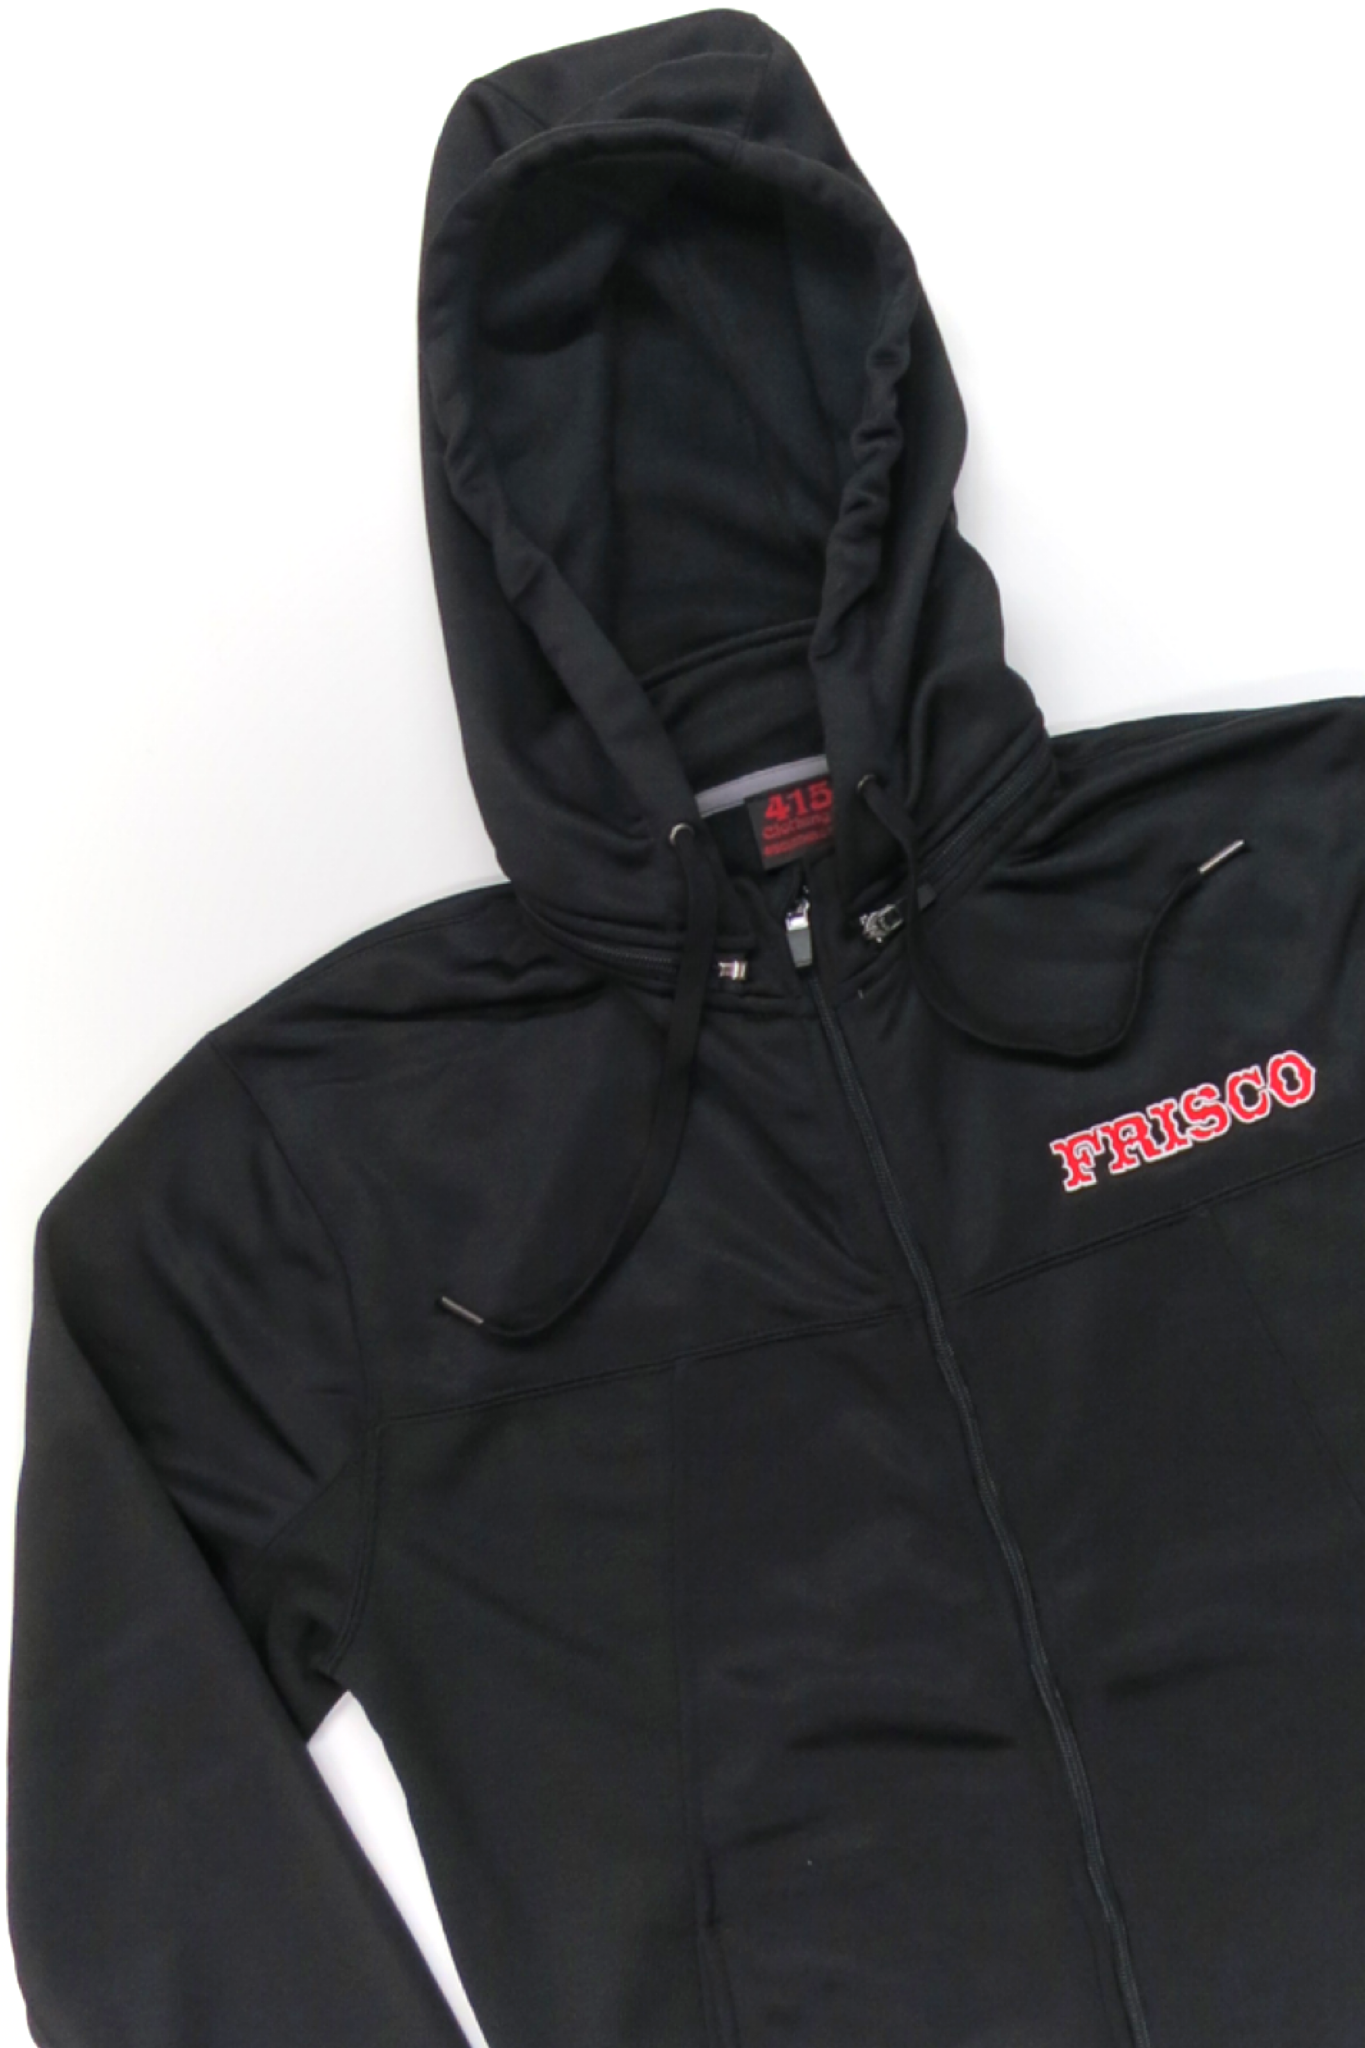 Frisco Hooded Zipper Sweatshirt with Removable Hood - 415 Clothing, Inc.